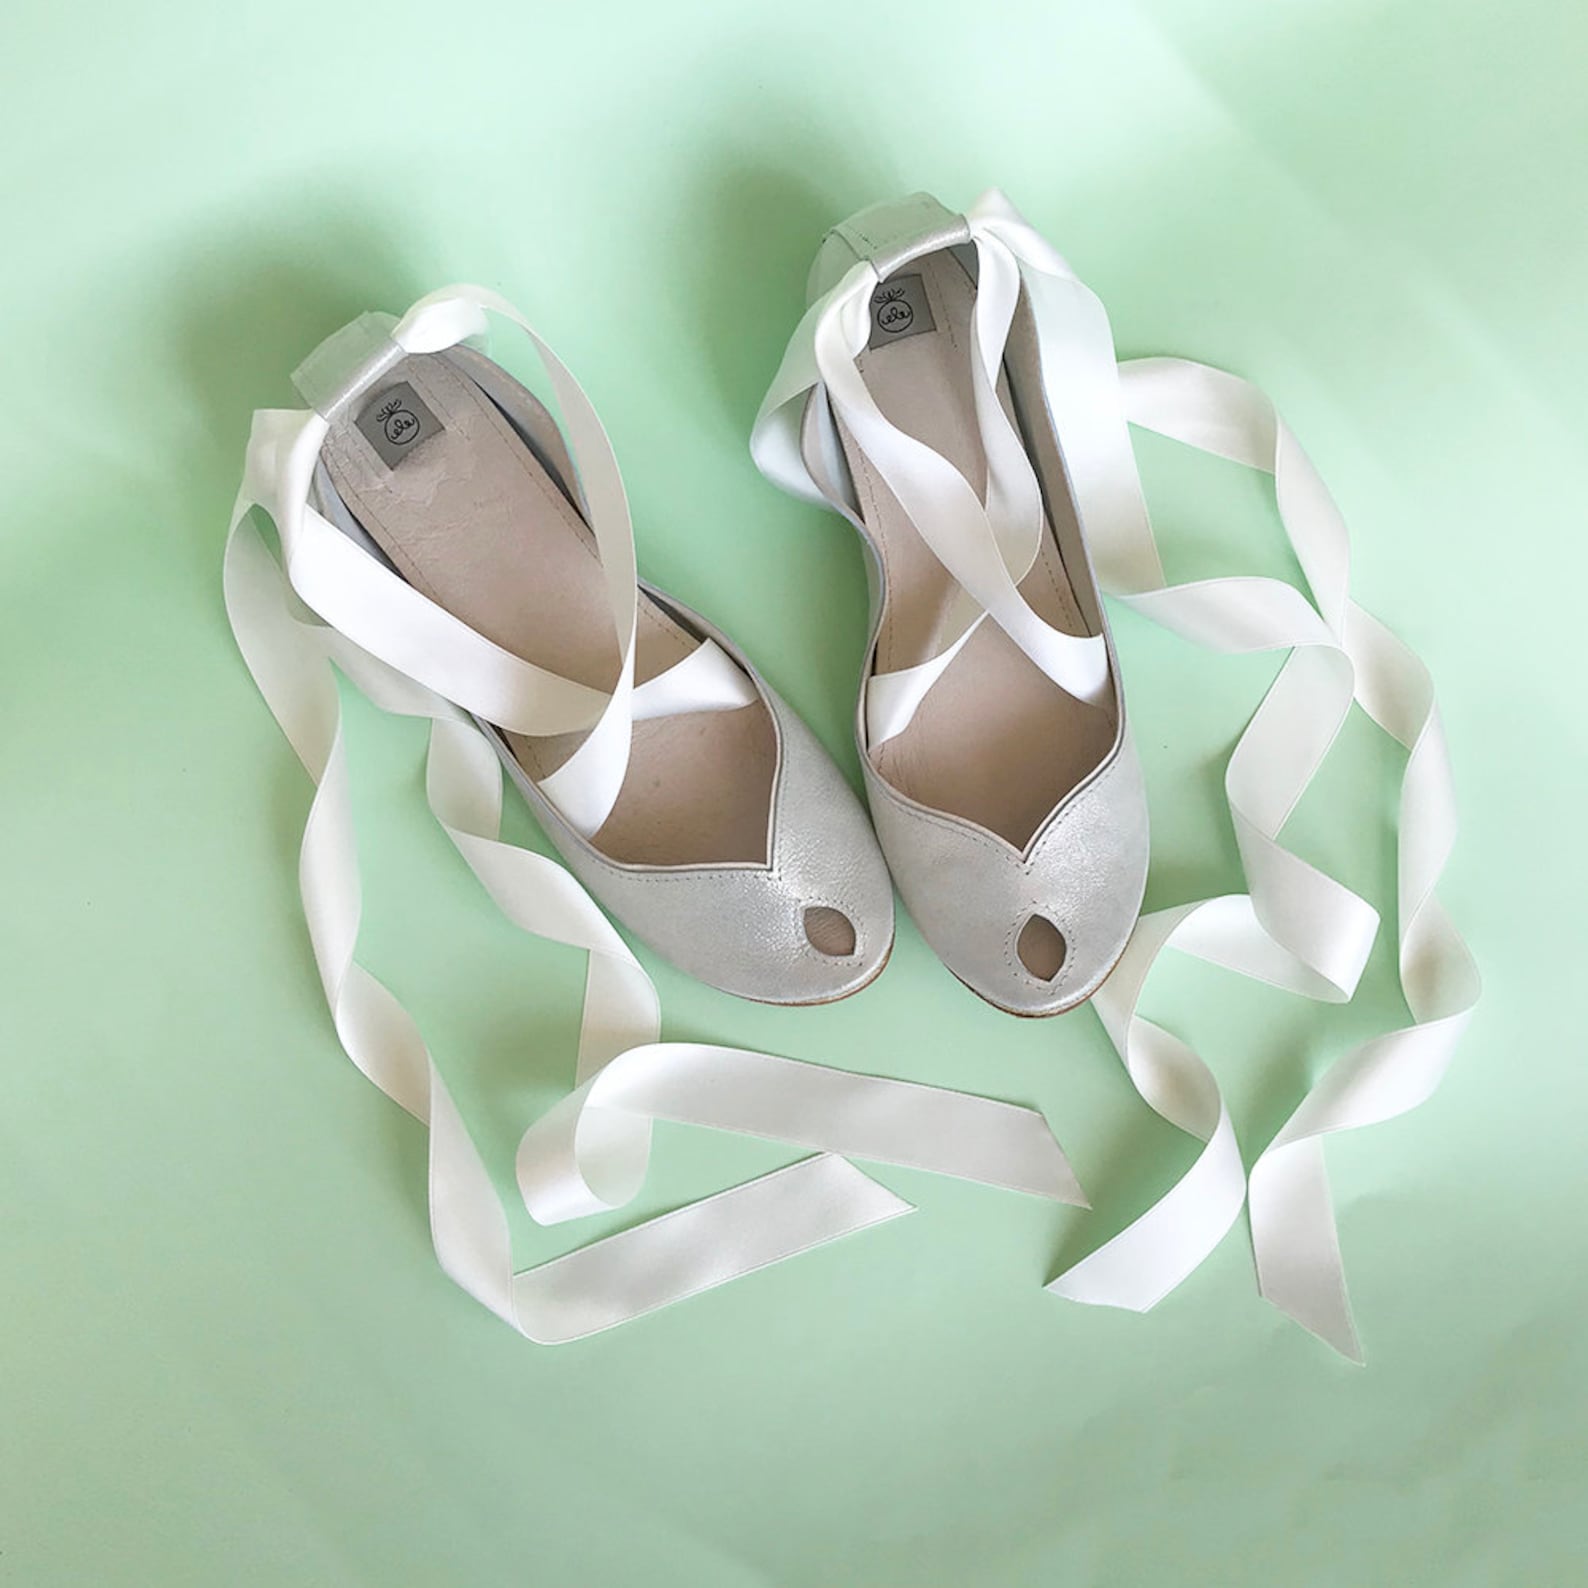 ballet flats with ribbons. wedding shoes flats. satin ribbon shoes. bridal shoes. bridal low heel shoes. peep toe flats. white g